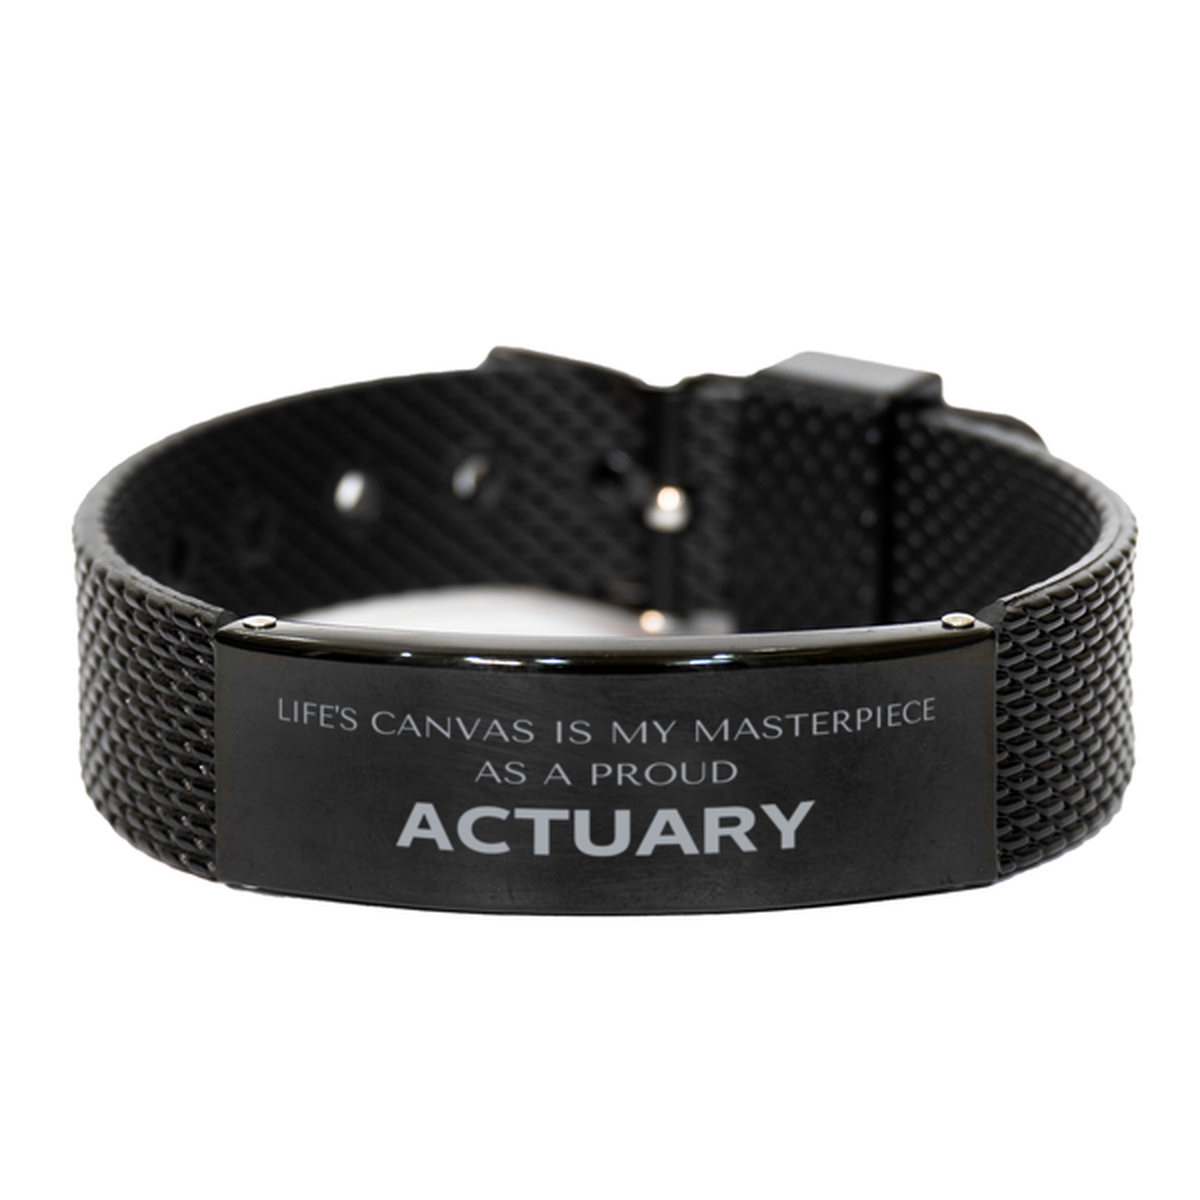 Proud Actuary Gifts, Life's canvas is my masterpiece, Epic Birthday Christmas Unique Black Shark Mesh Bracelet For Actuary, Coworkers, Men, Women, Friends